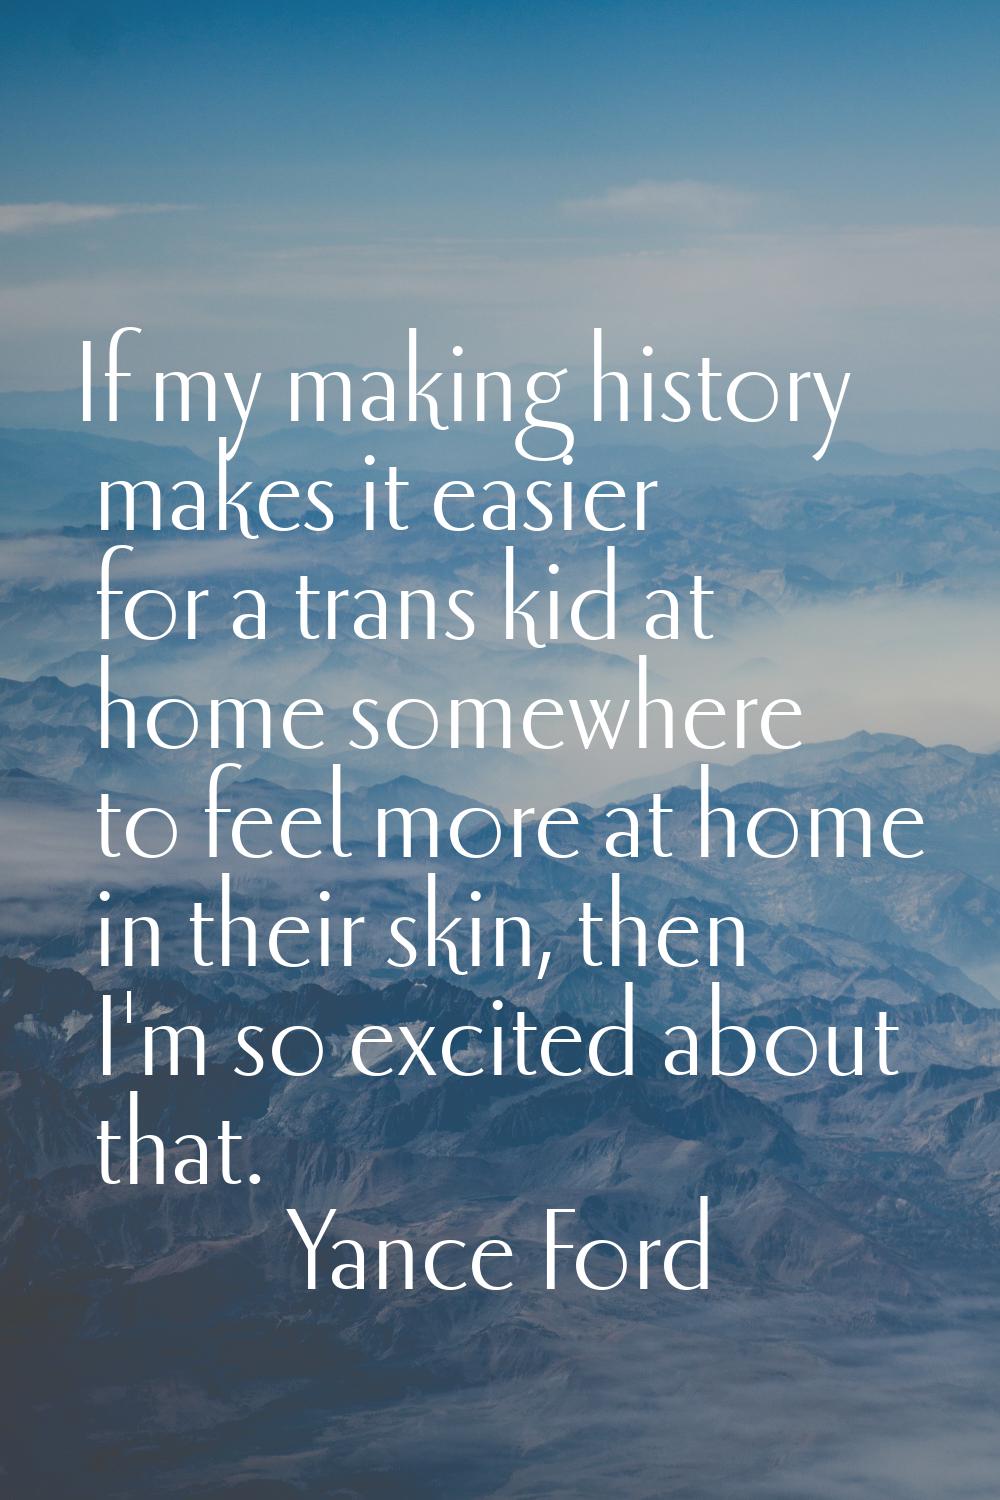 If my making history makes it easier for a trans kid at home somewhere to feel more at home in thei